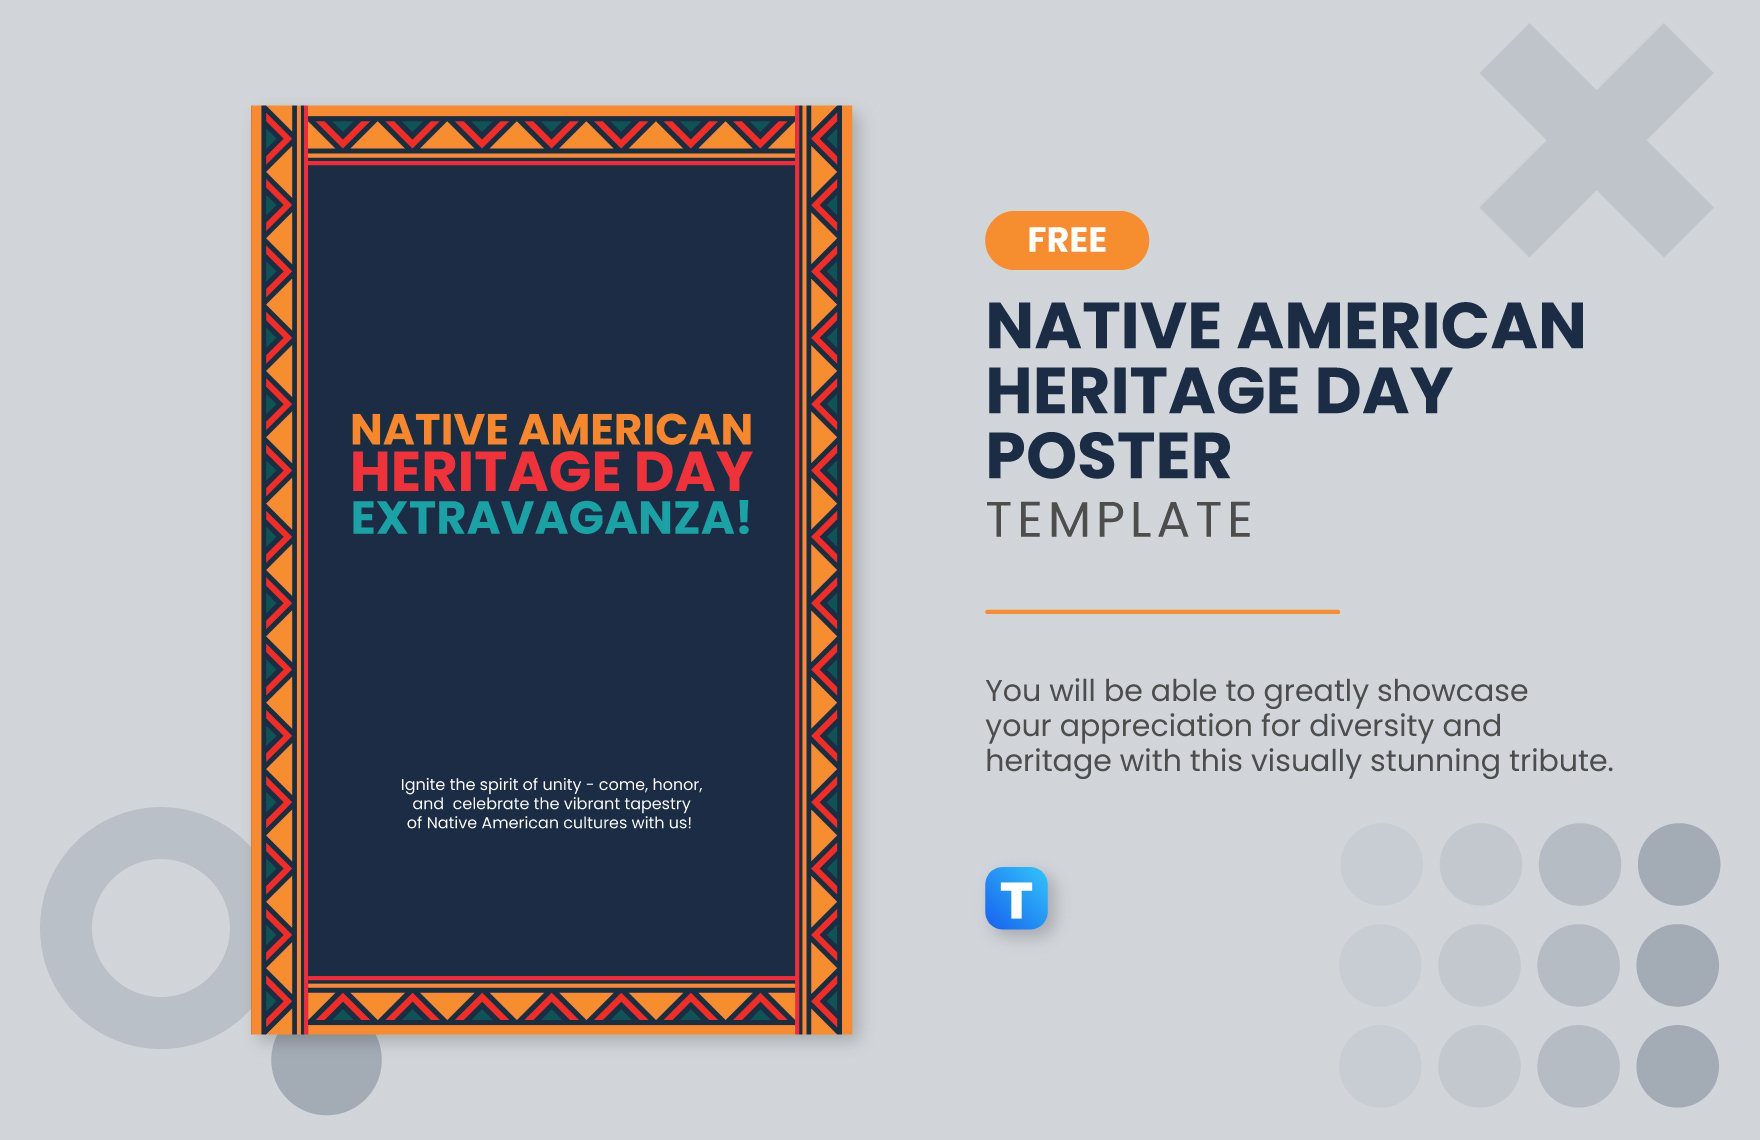 Native American Heritage Day Poster